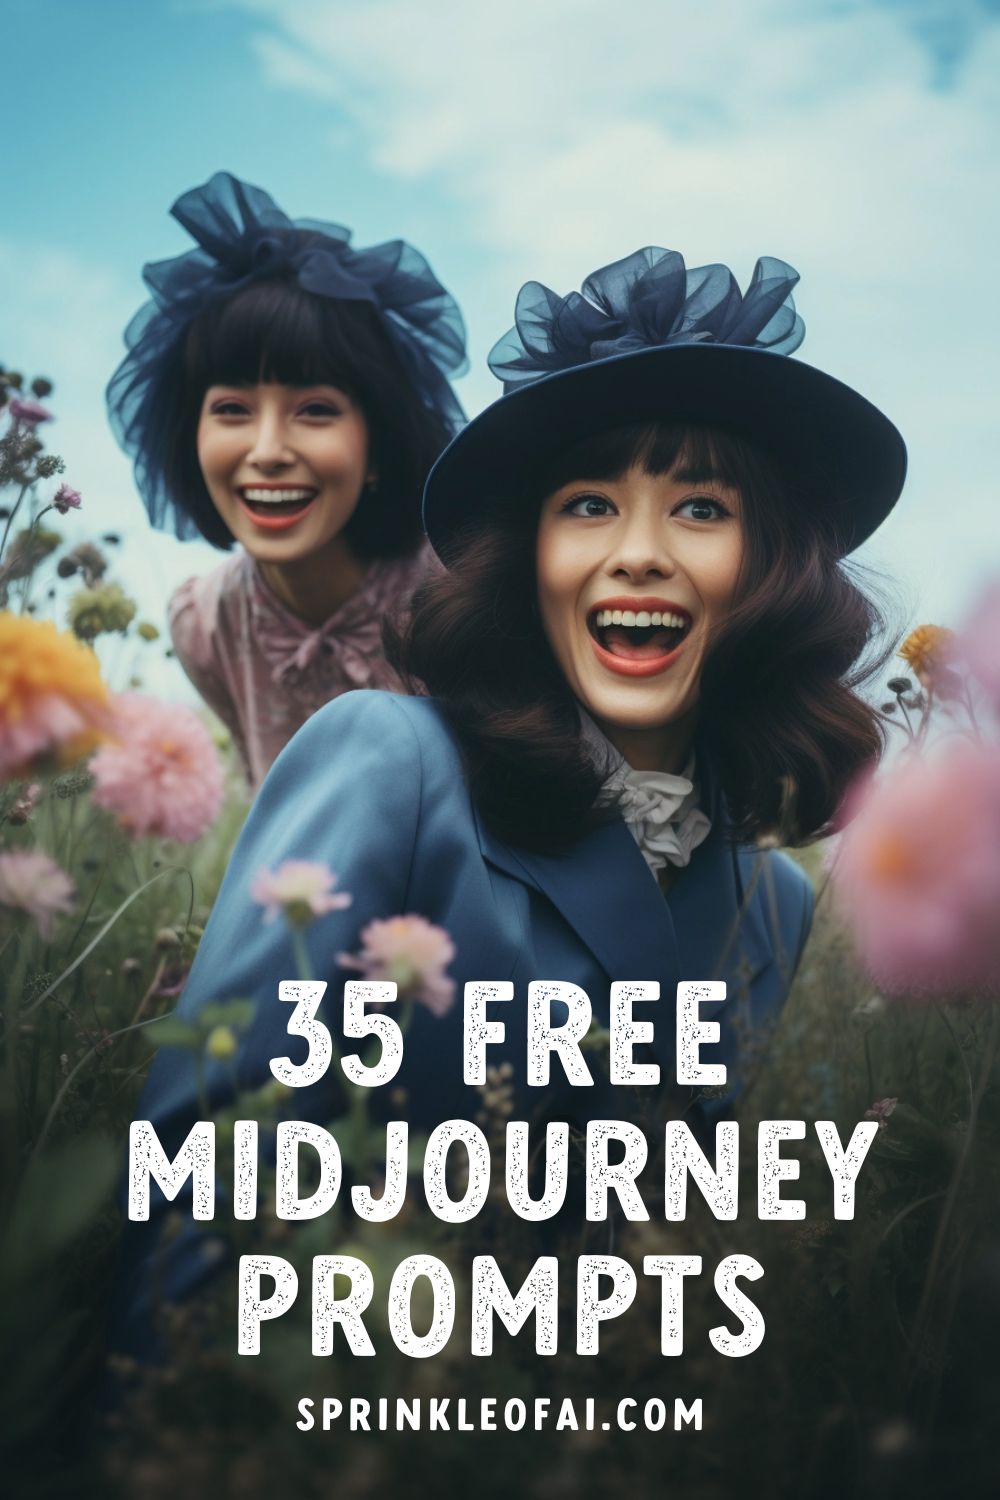 35 Free Best Midjourney Prompts You Need to Try - Sprinkle of AI ART MIdjourney for Beginners